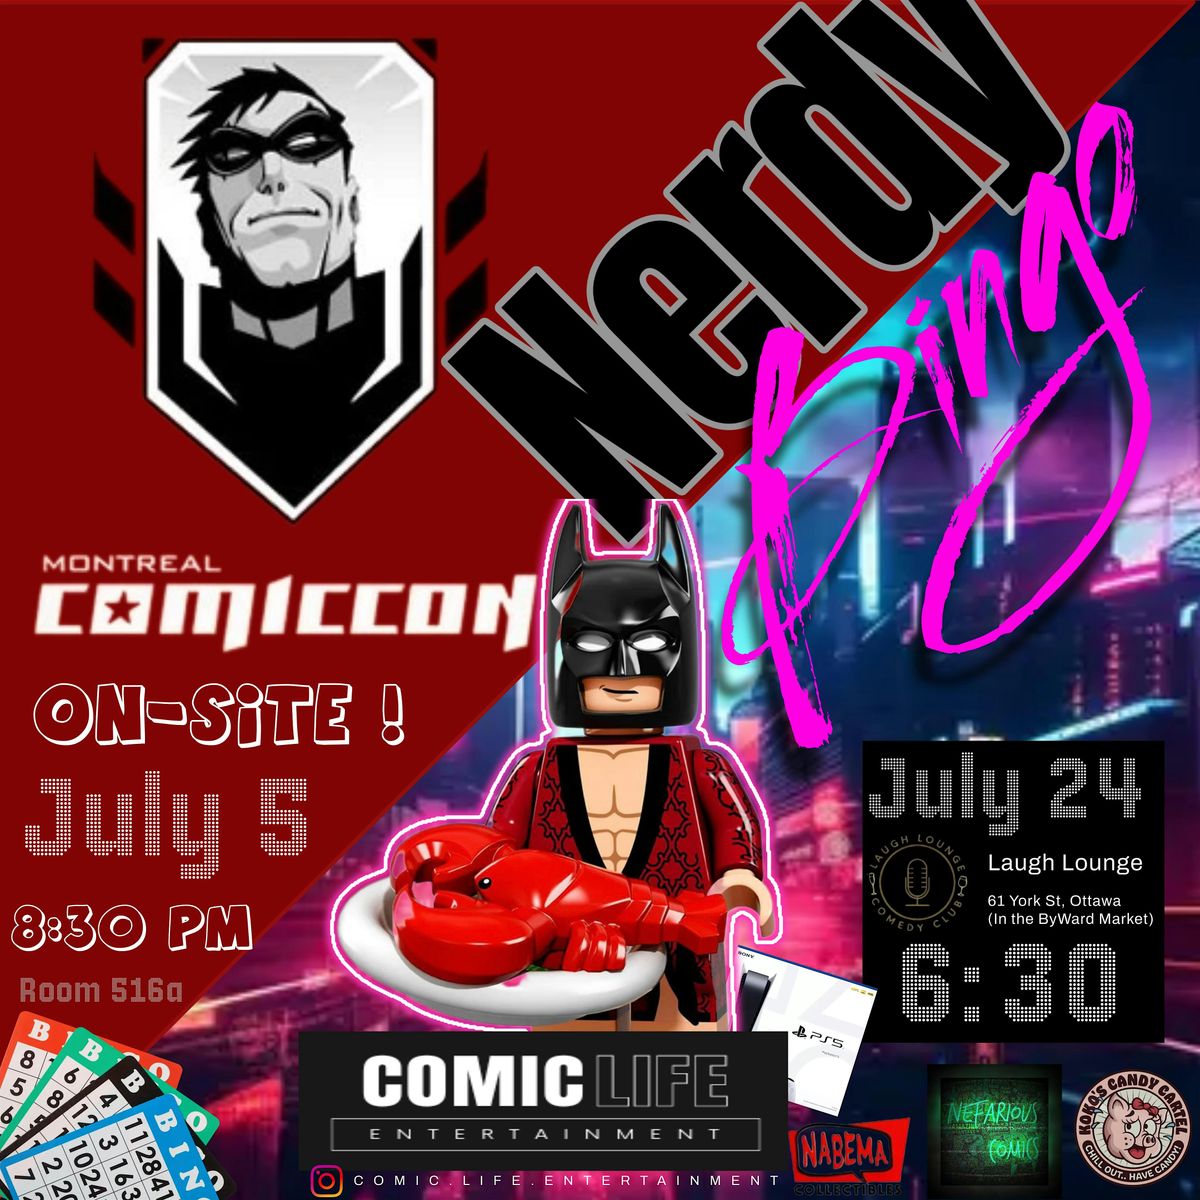 Nerdy Bingo and Live Auction Summer Spectacular!!!